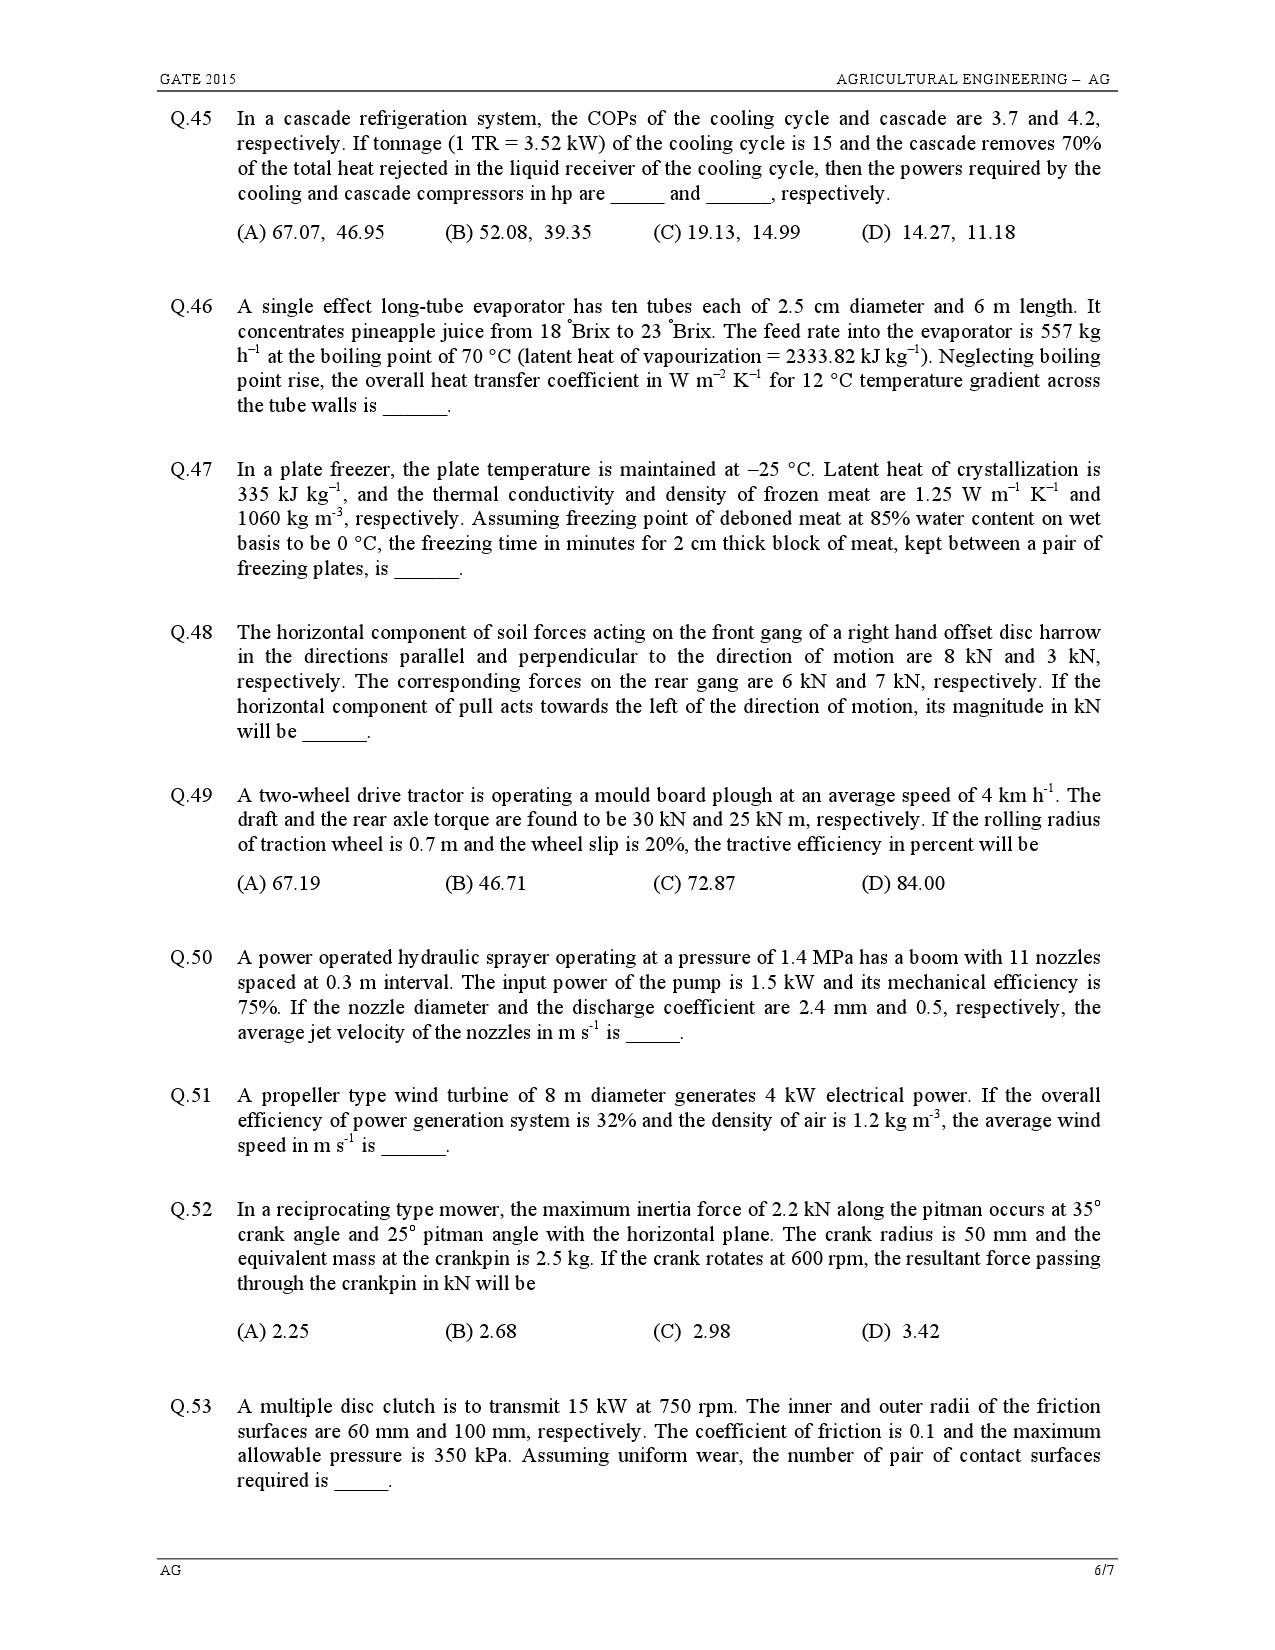 GATE Exam Question Paper 2015 Agricultural Engineering 6